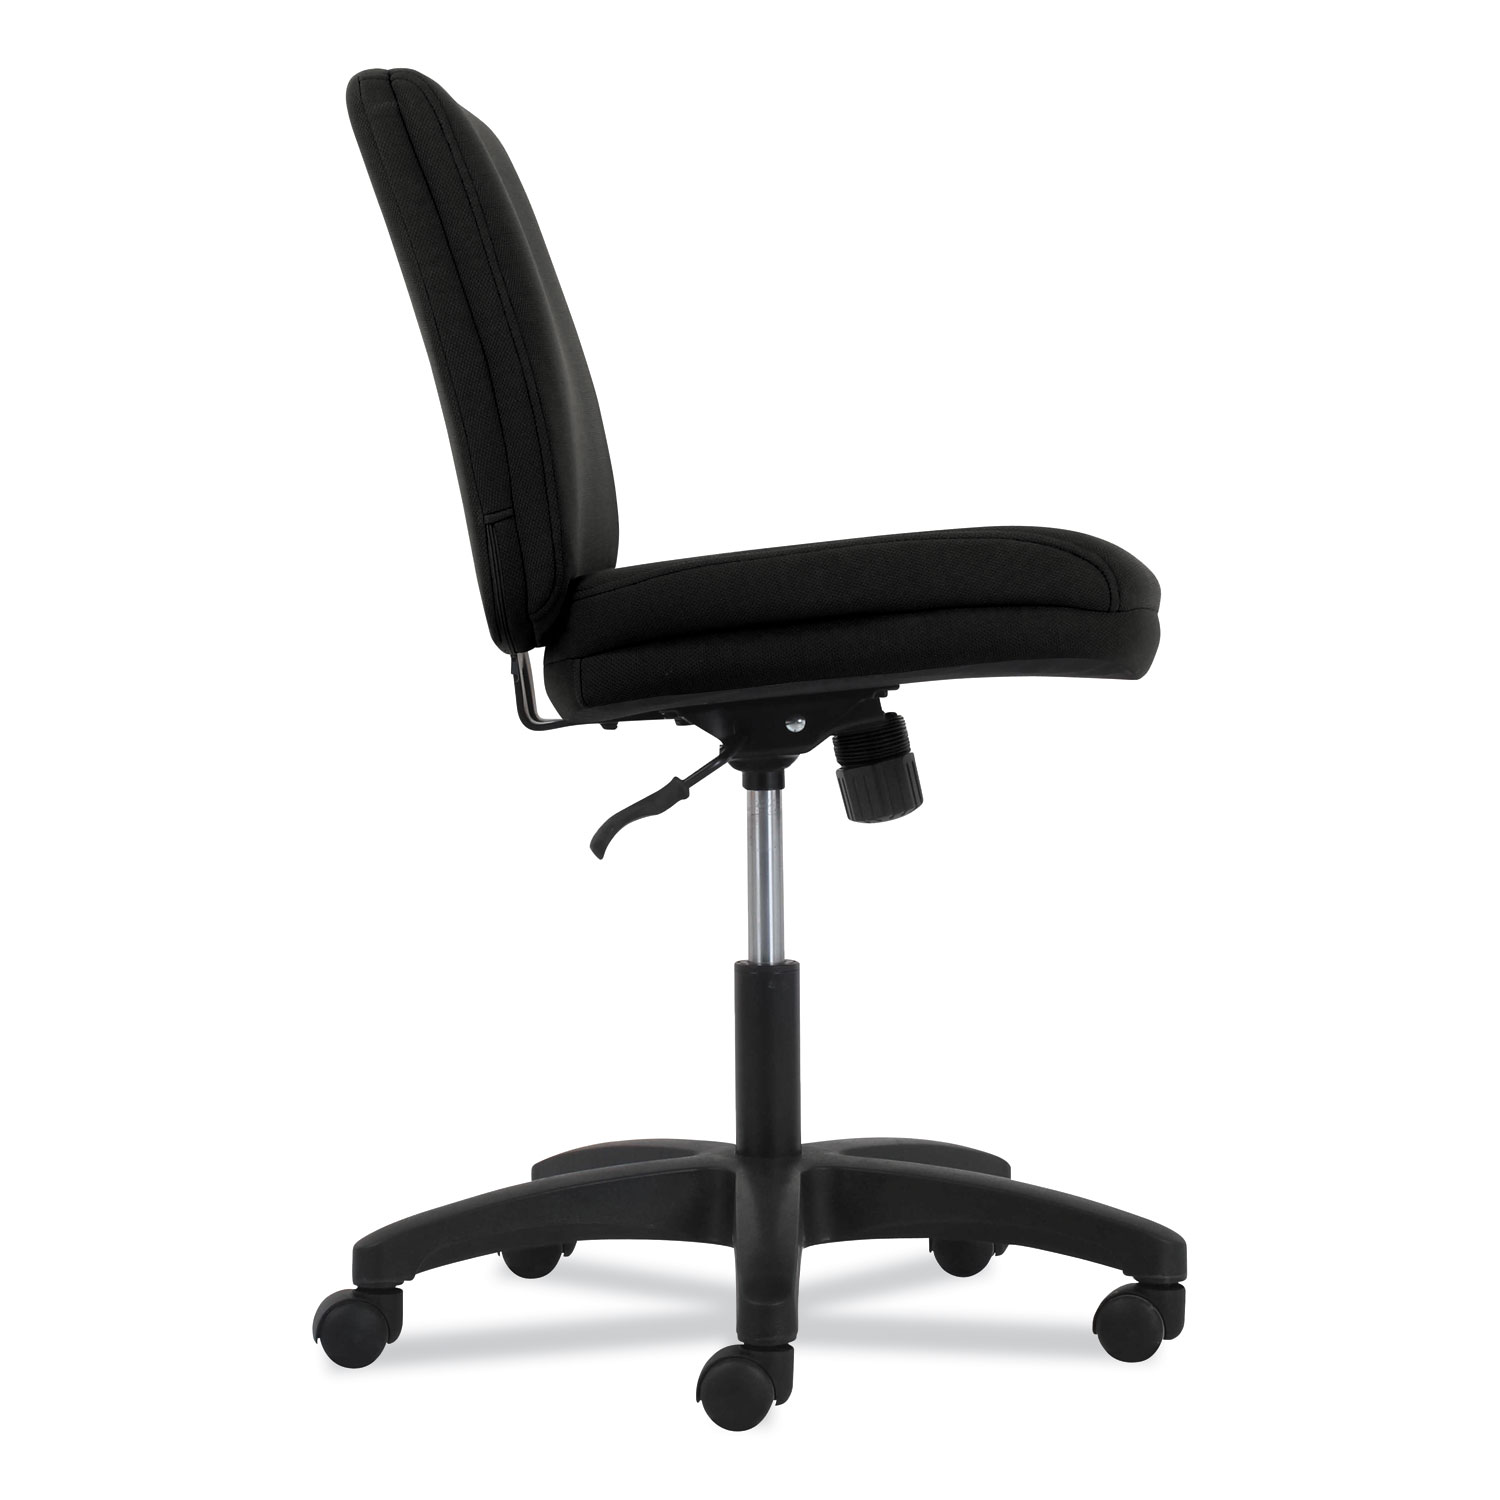 Network Low-Back Armless Chair, 18.7 x 16.5 x 21.5, Supports up to 250 lbs., Black Seat/Back and Base